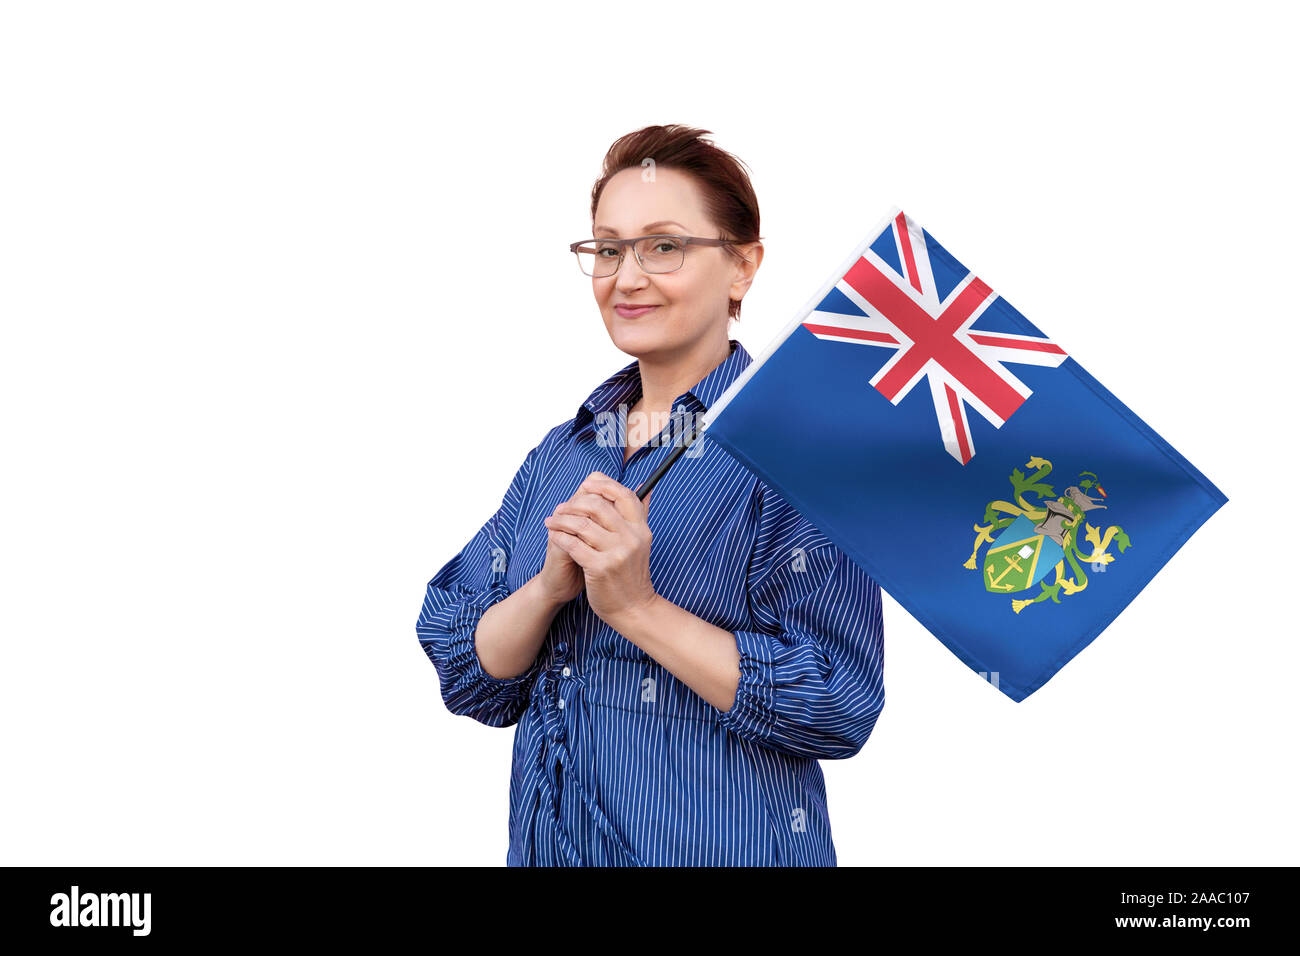 Pitcairn Islands flag. Woman holding flag. Nice portrait of middle aged lady 40 50 years old holding a large flag isolated on white background. Stock Photo